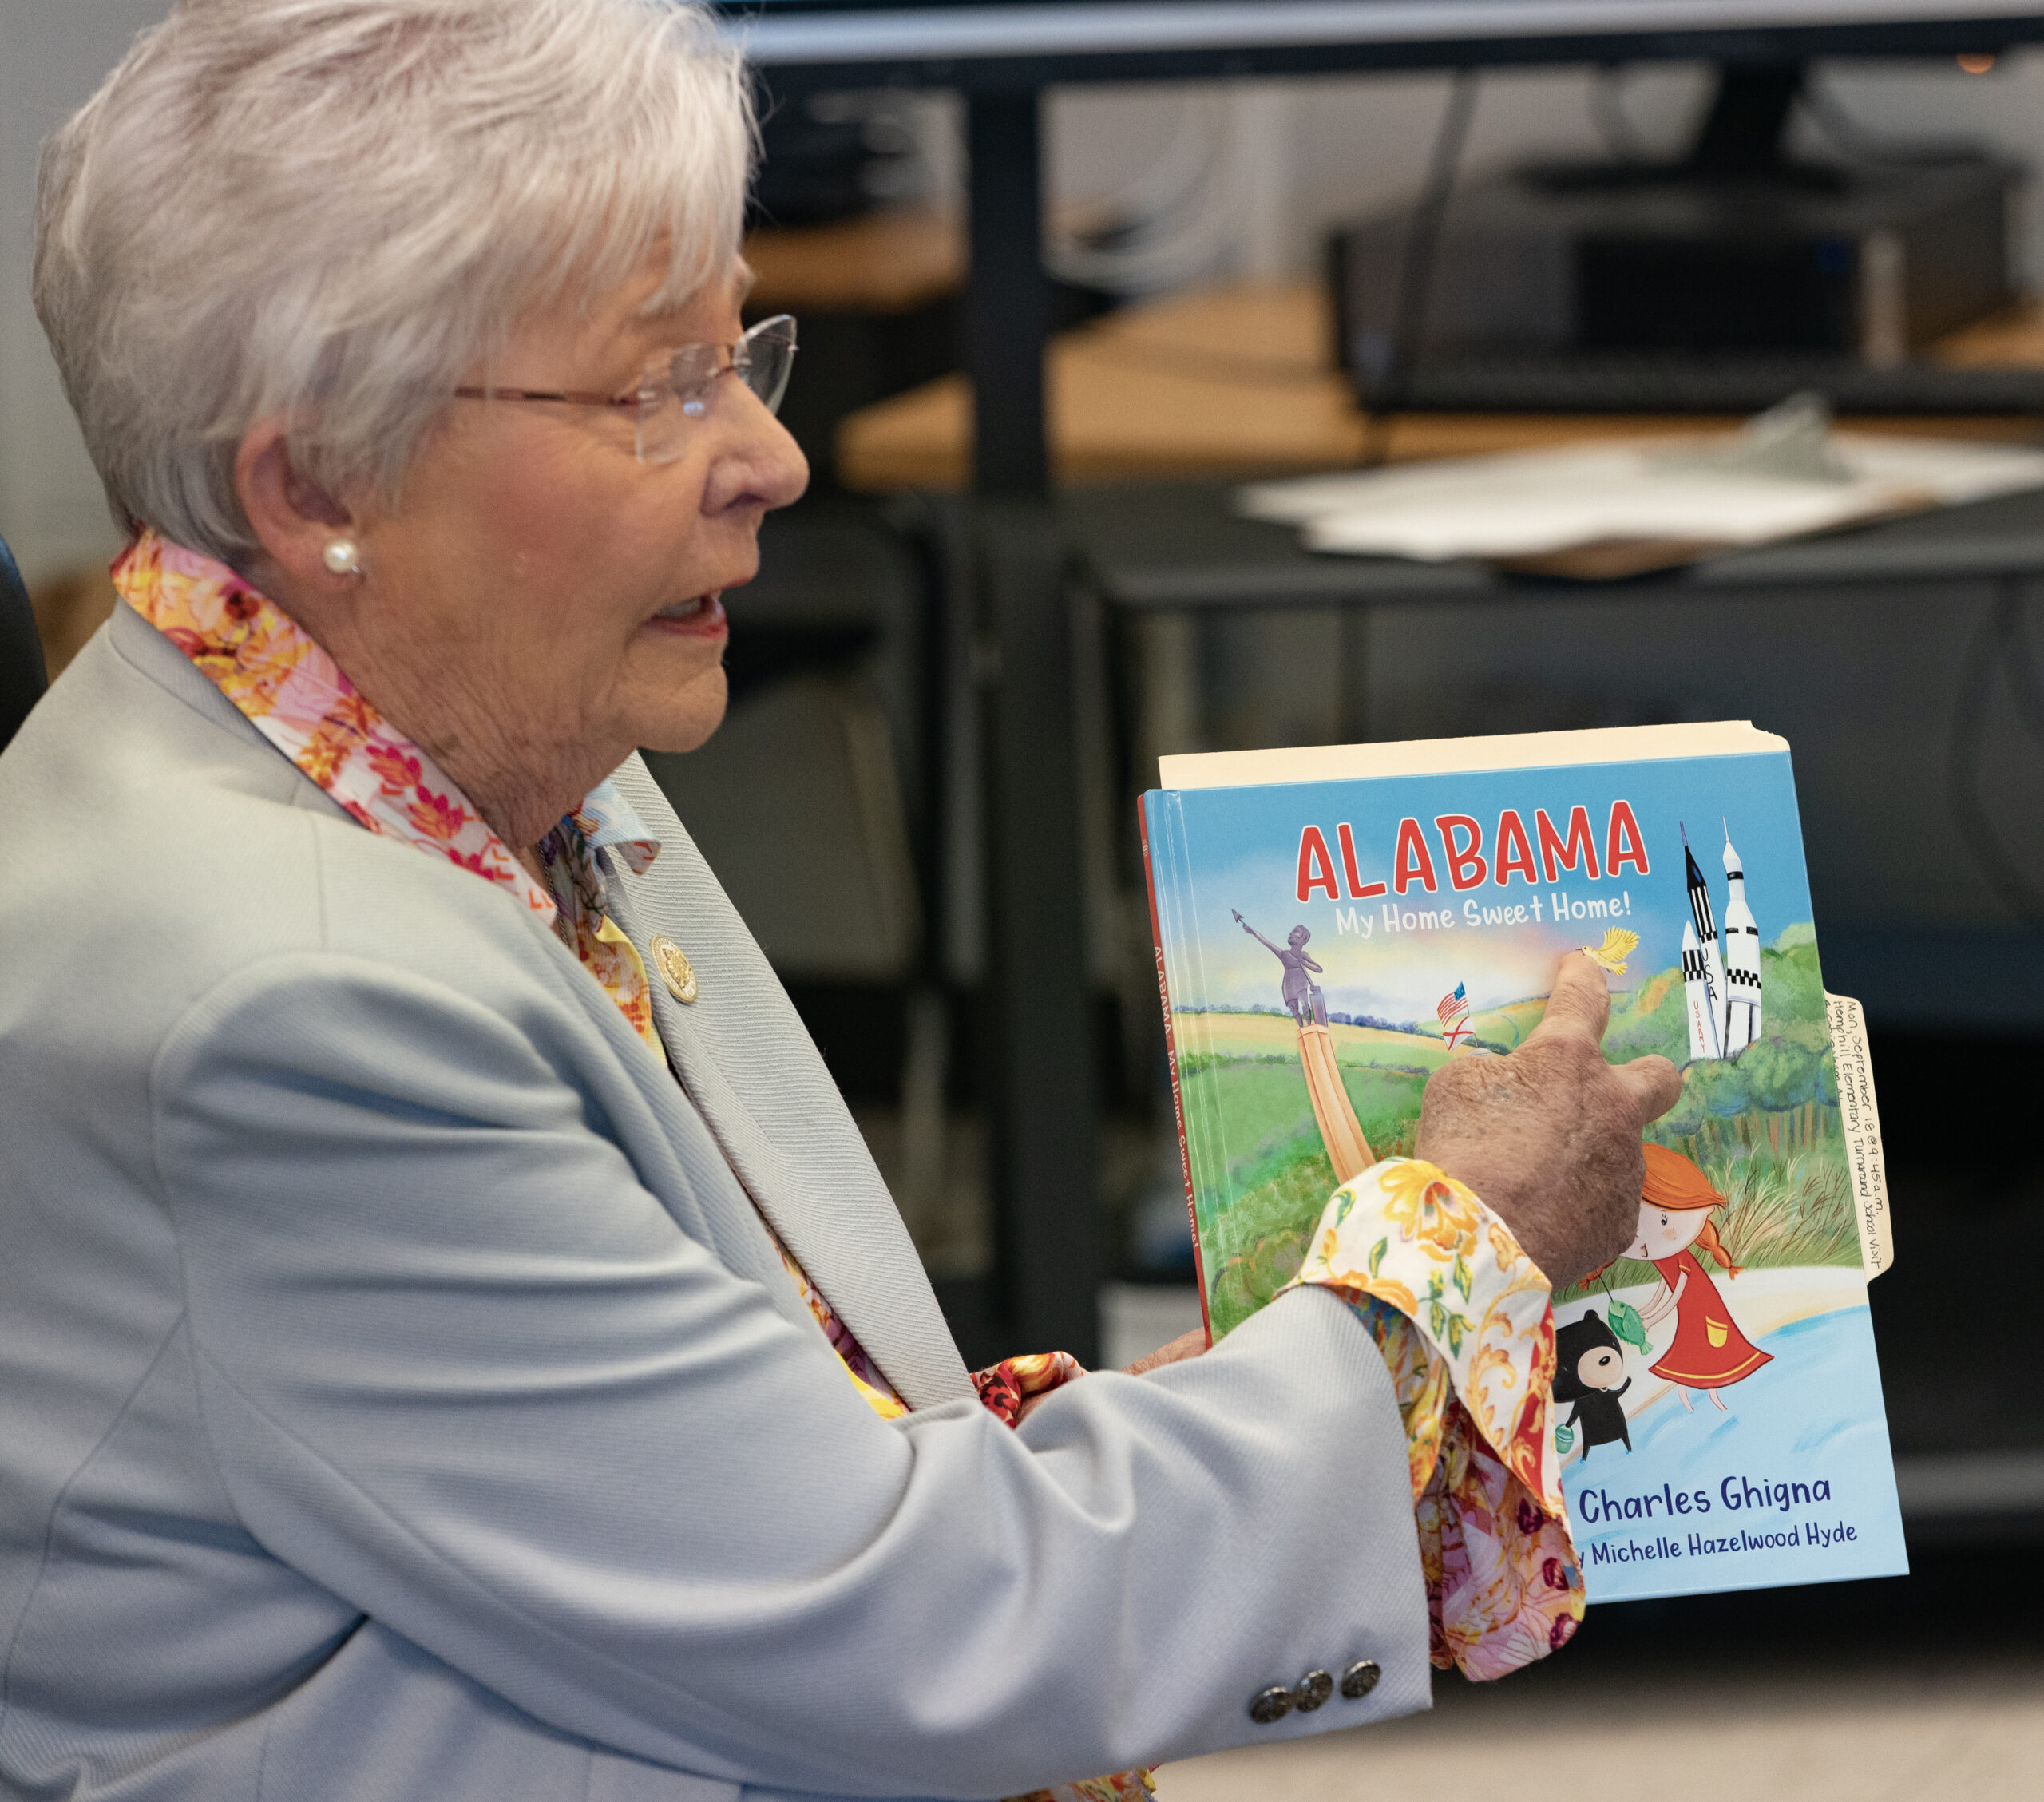 Governor Ivey Continues Back-to-School Tour, Celebrates Student Achievement